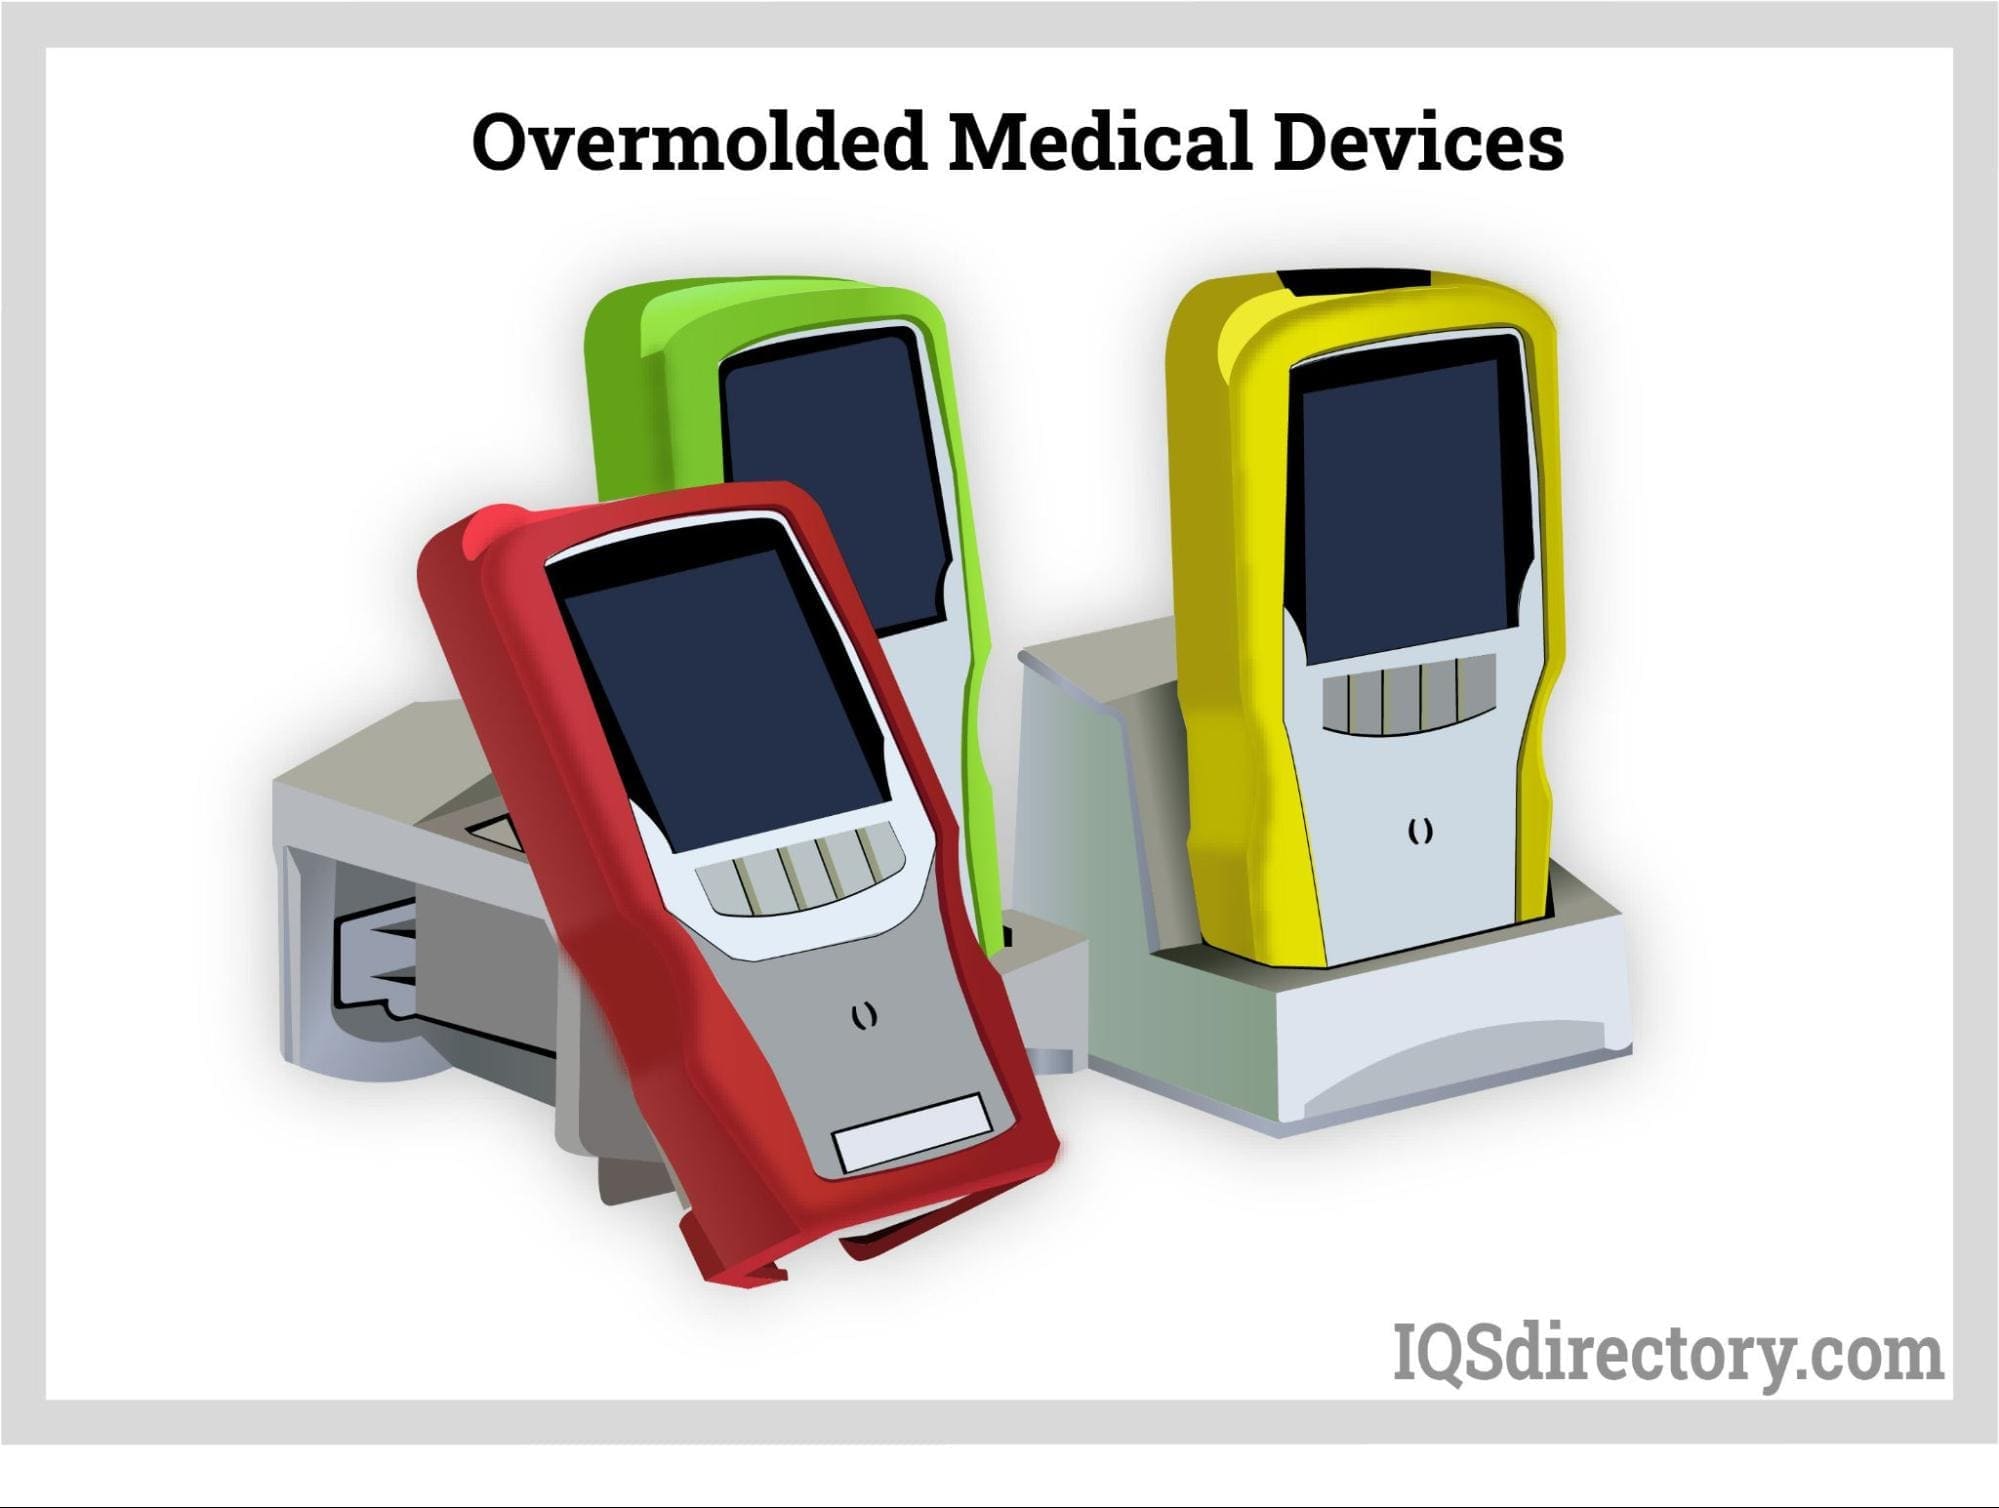 Overmolded Medical Devices